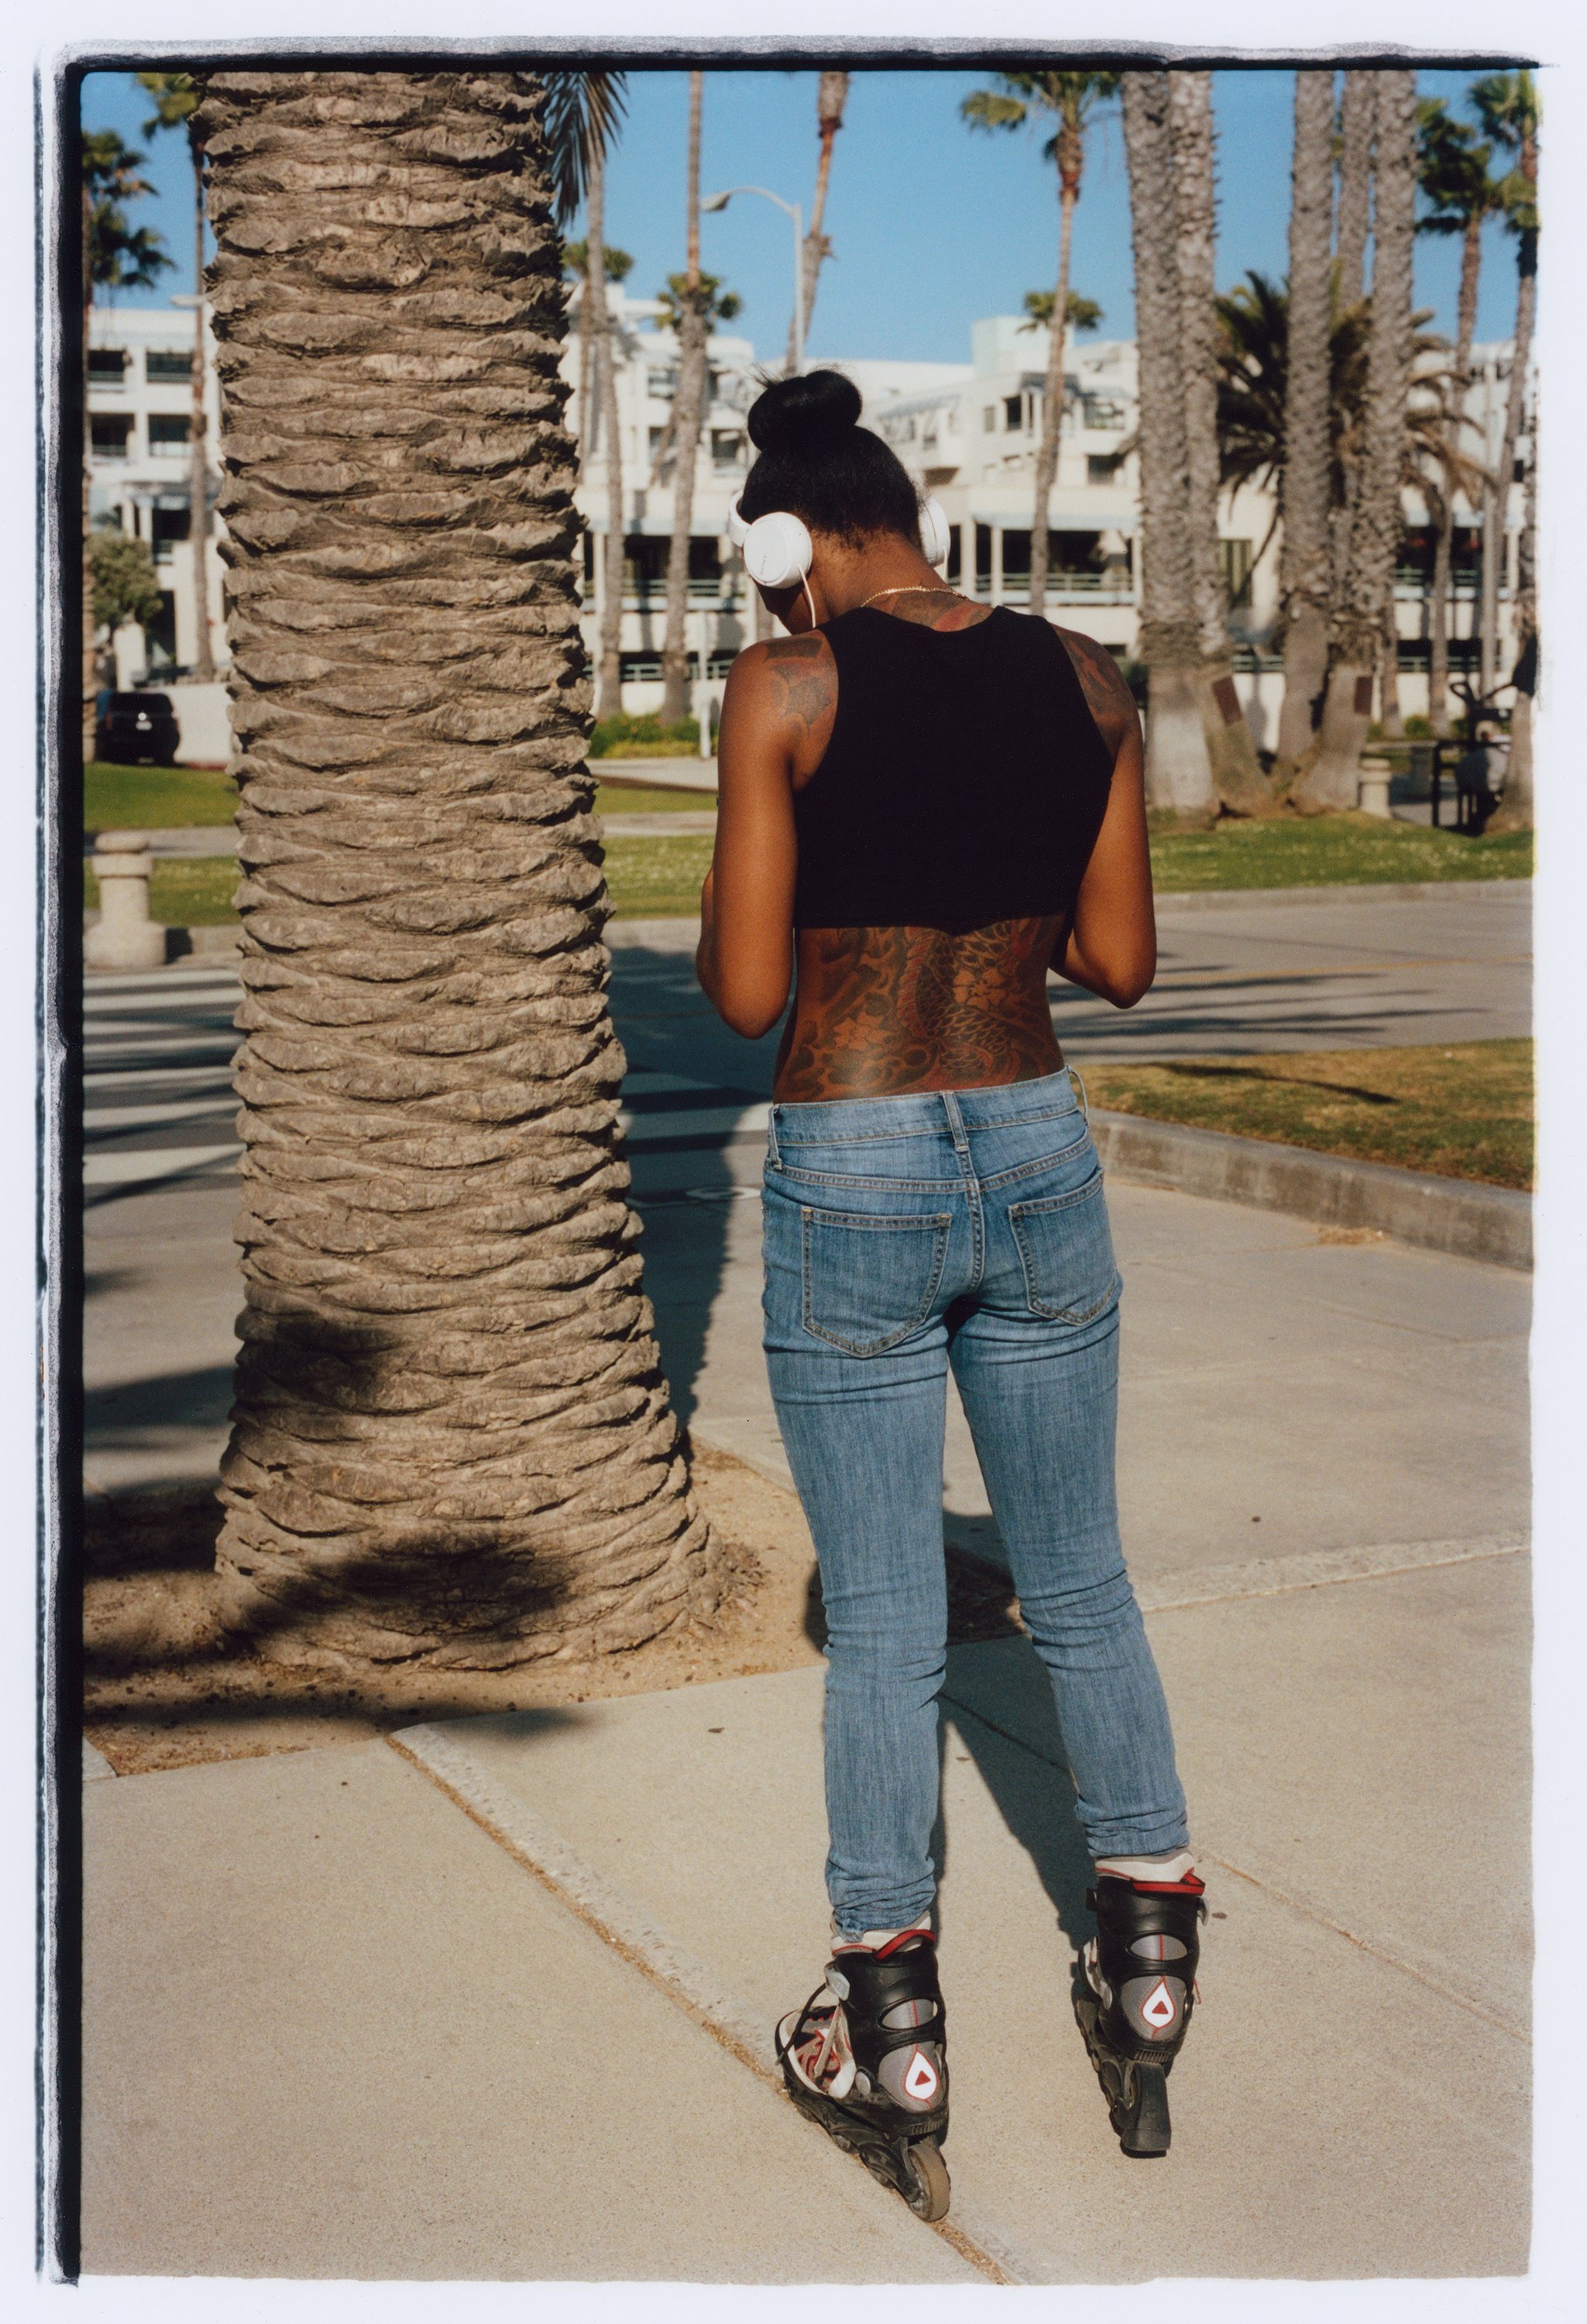 Not Even This #11, Venice, Los Angeles, 2015